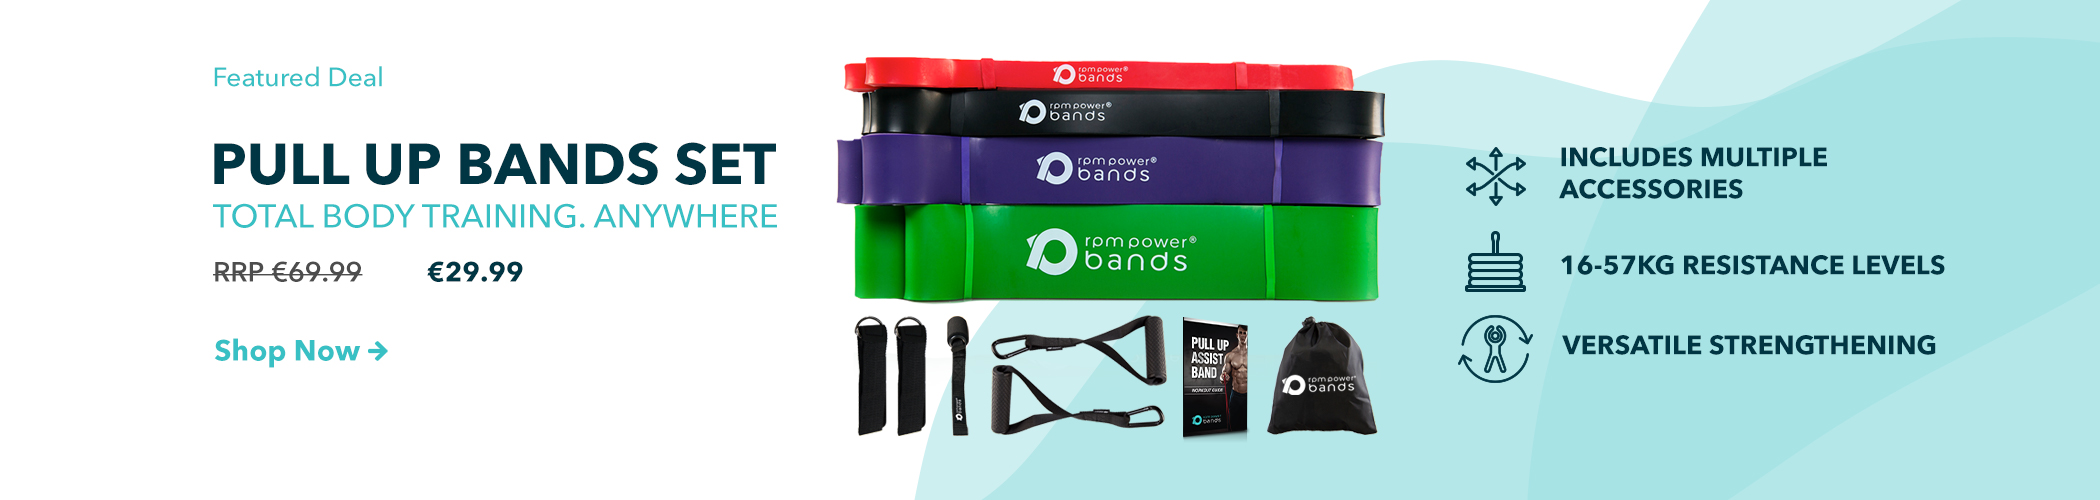 Pull Up Bands Set of 4 category banner for desktop with pricing